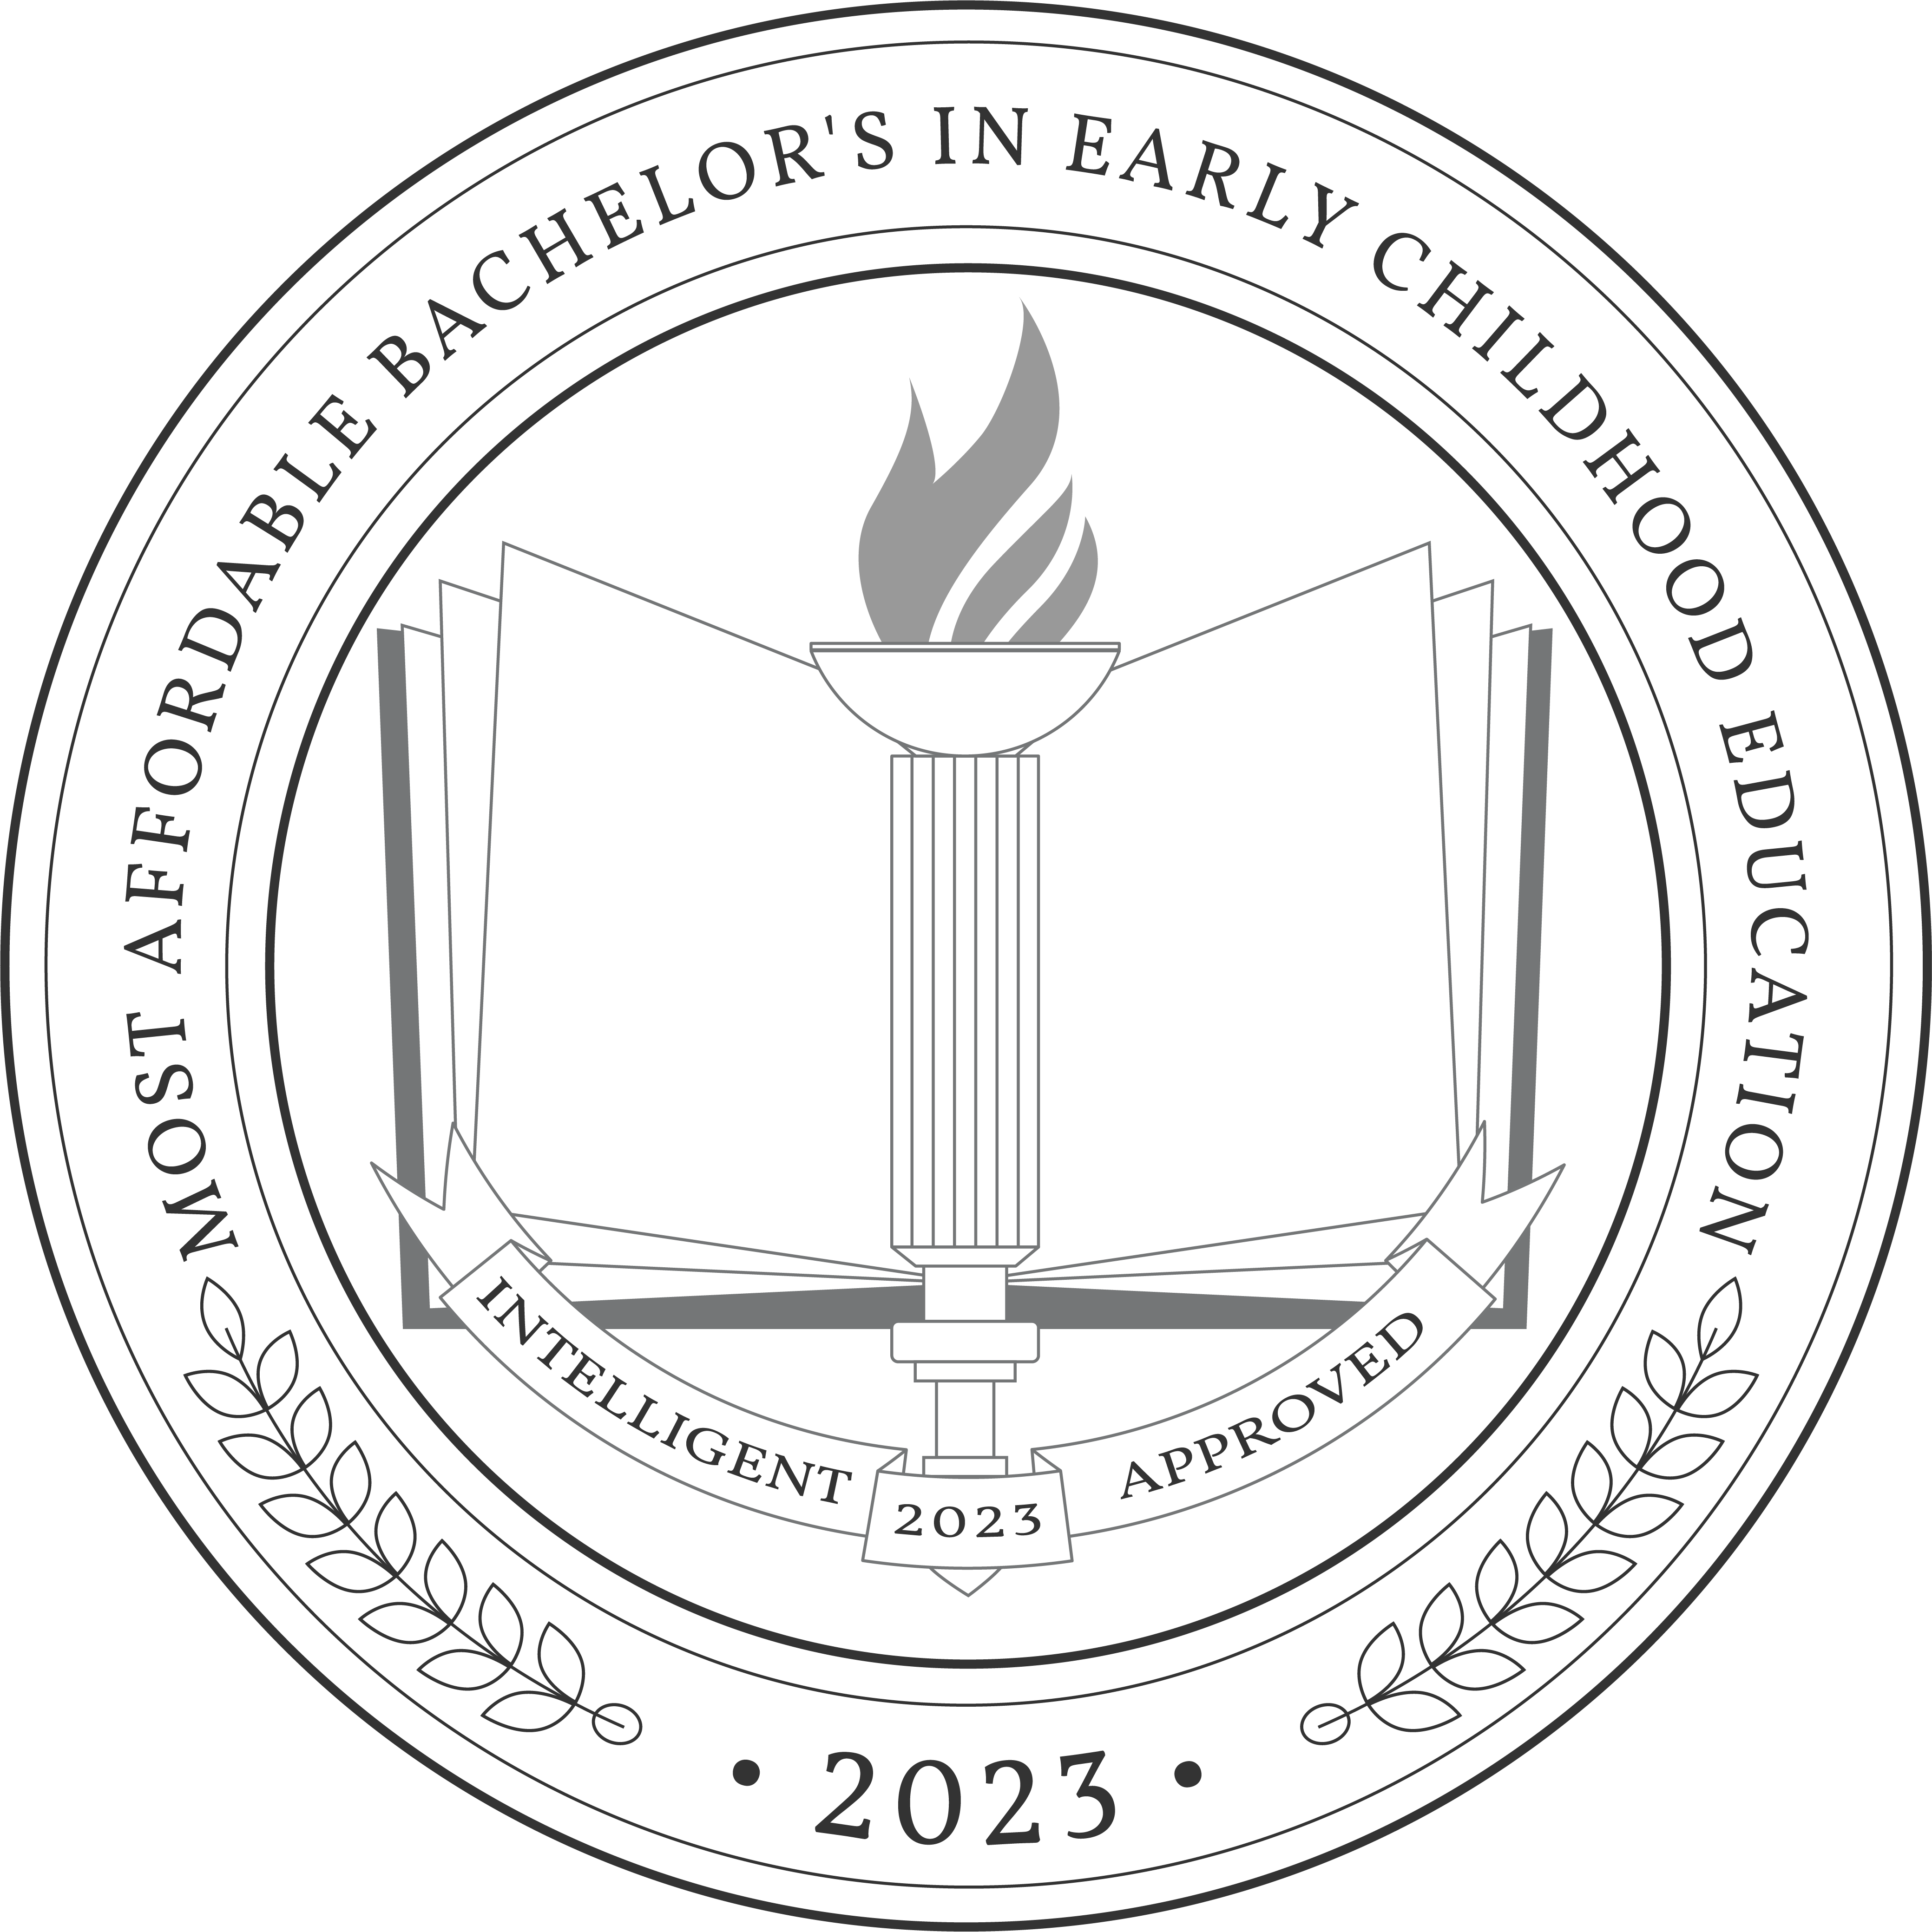 Most Affordable Bachelor's in Early Childhood Education 2023